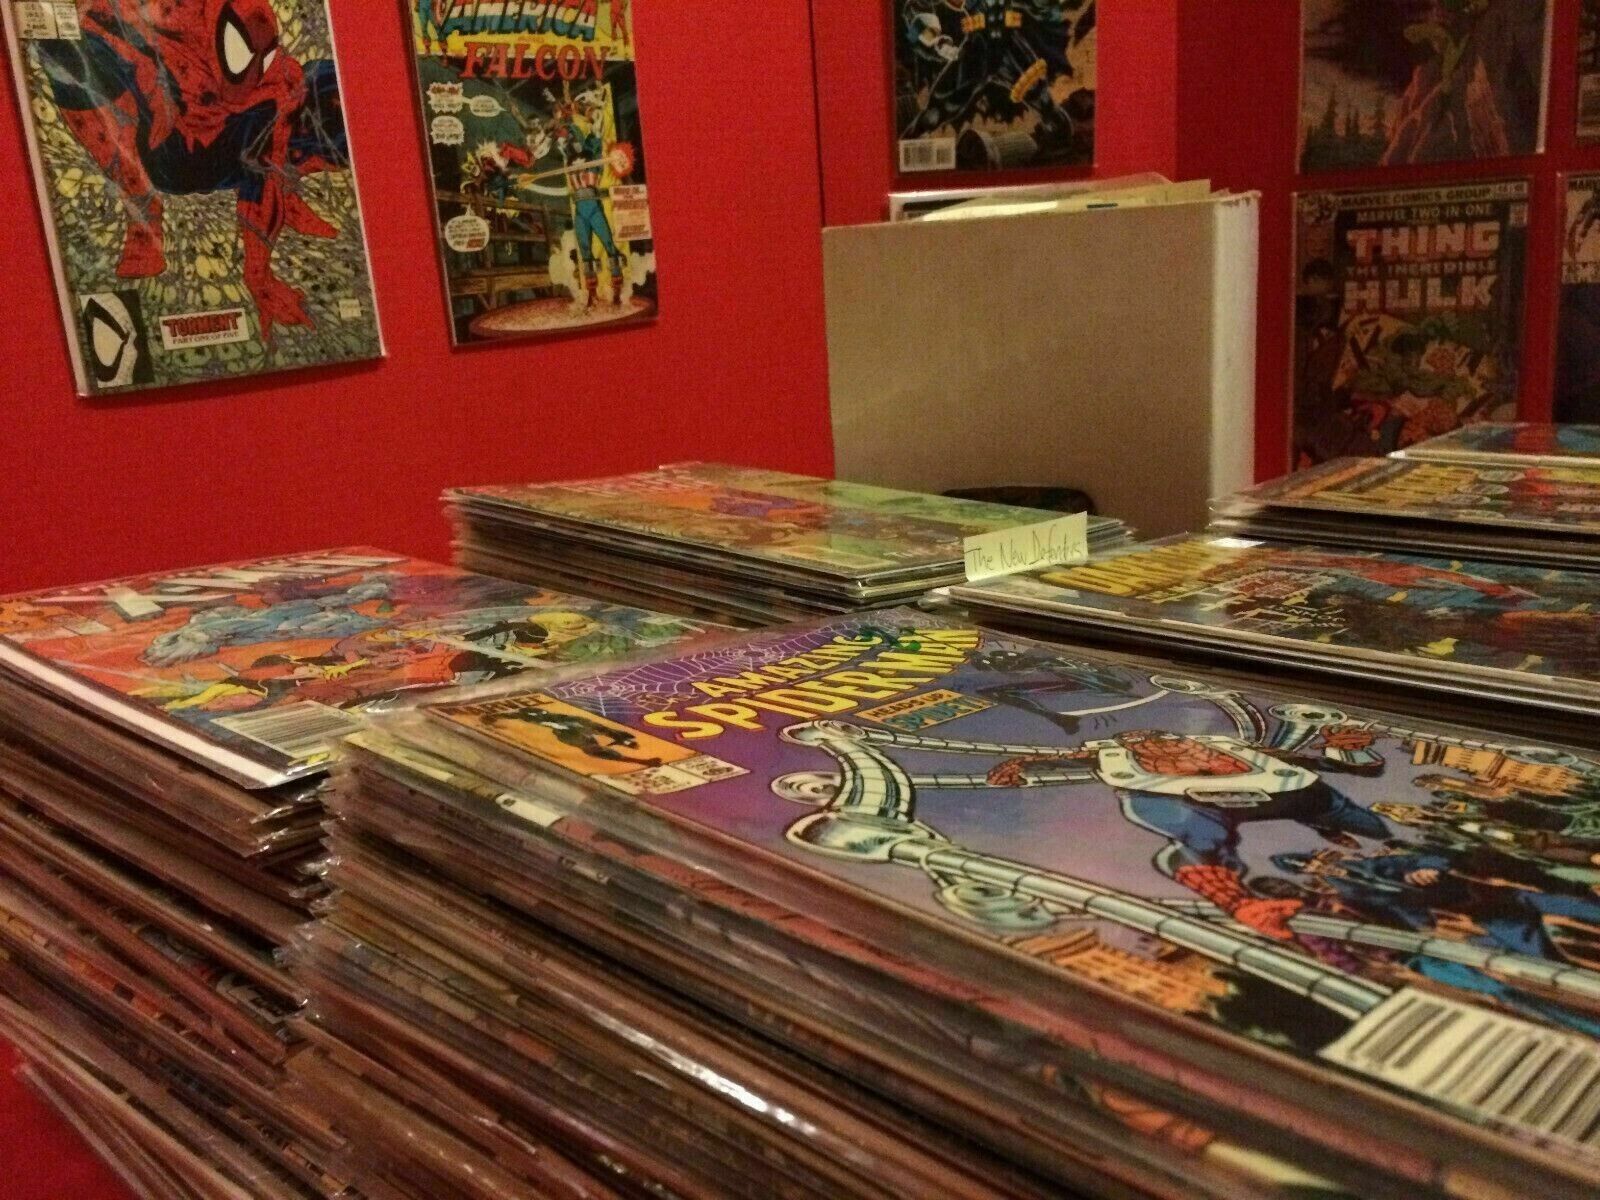 HUGE 25 COMICS BOOK LOT-MARVEL, DC, INDIES- VF+ to NM+ ALL